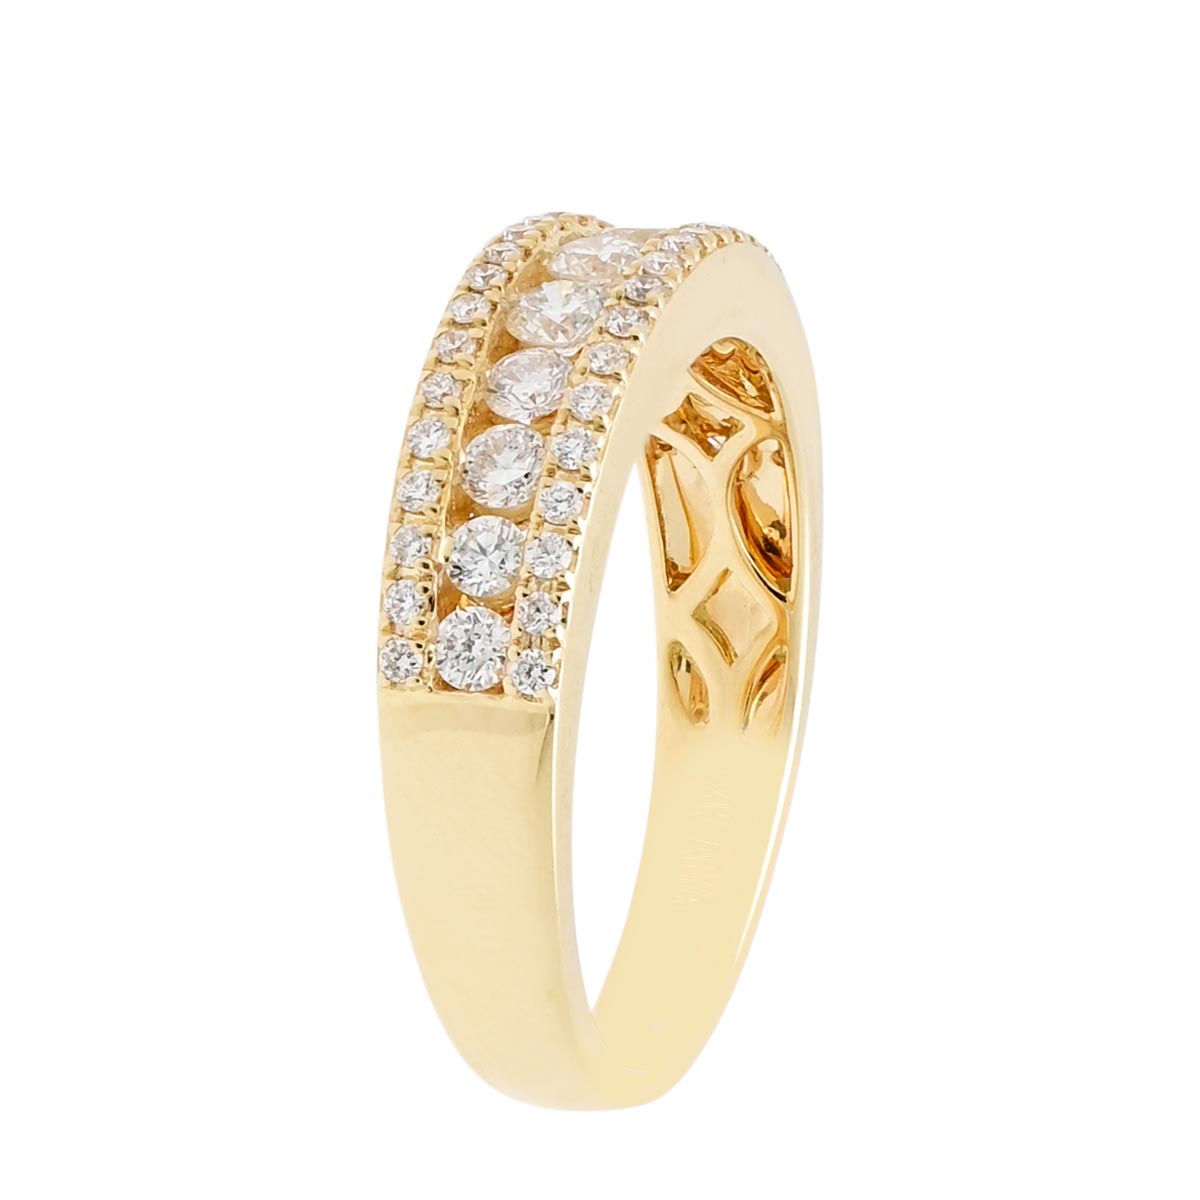 Diamond Fashion Ring in 14kt Yellow Gold (3/4ct tw)